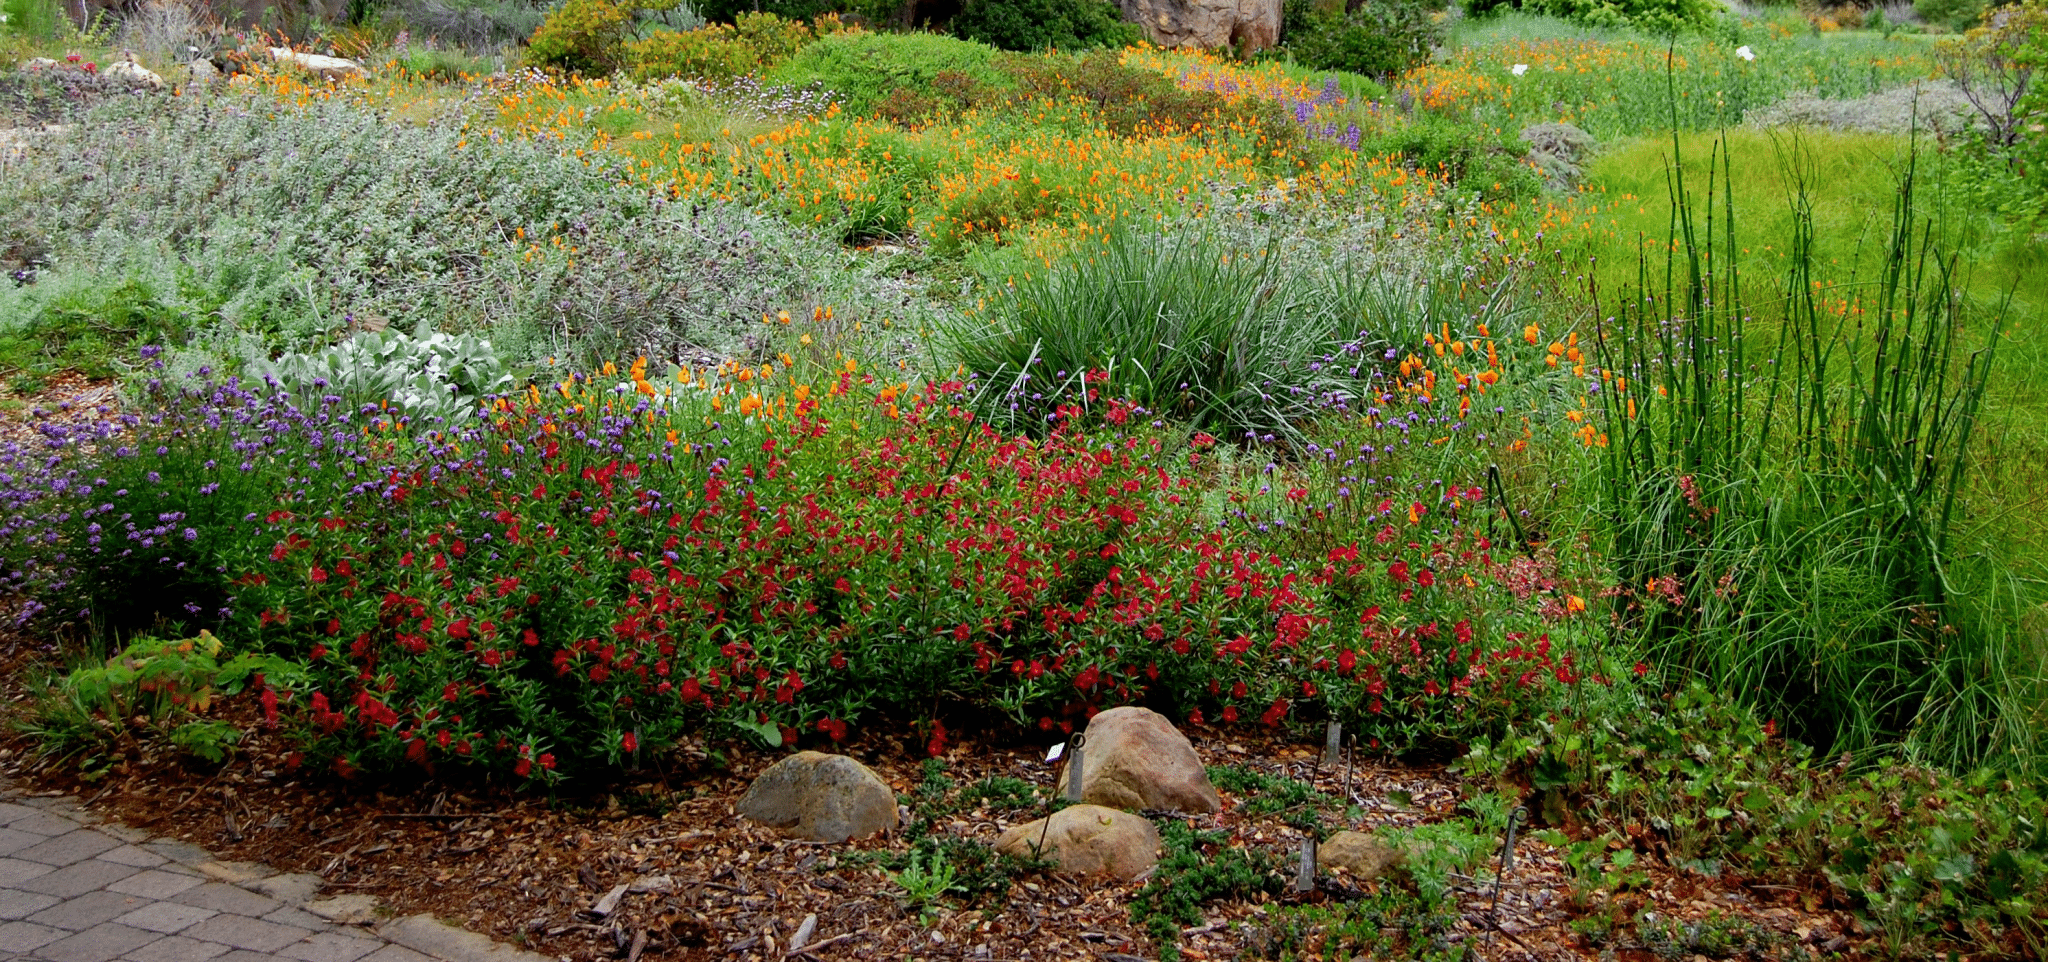 A garden of drought tolerant plants blooming in the summer